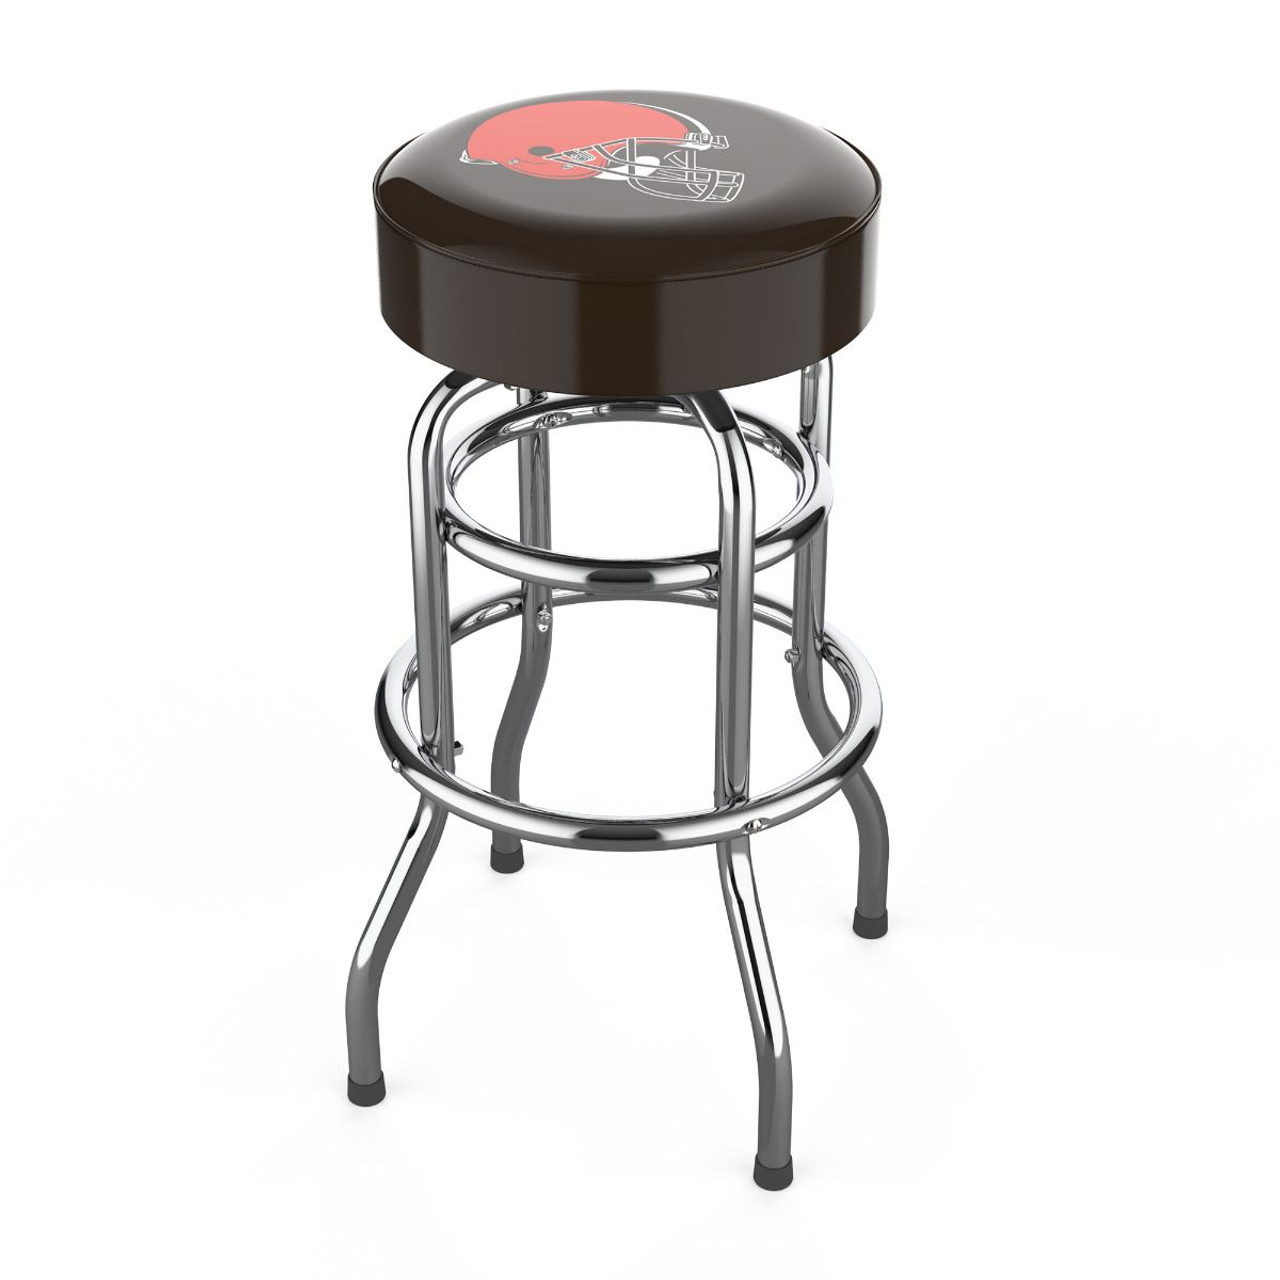 Cle, Cleveland, Browns, 30", Chrome, Bar, Stool, 680-1020, 26-1001, NFL, Imperial, 720801324098